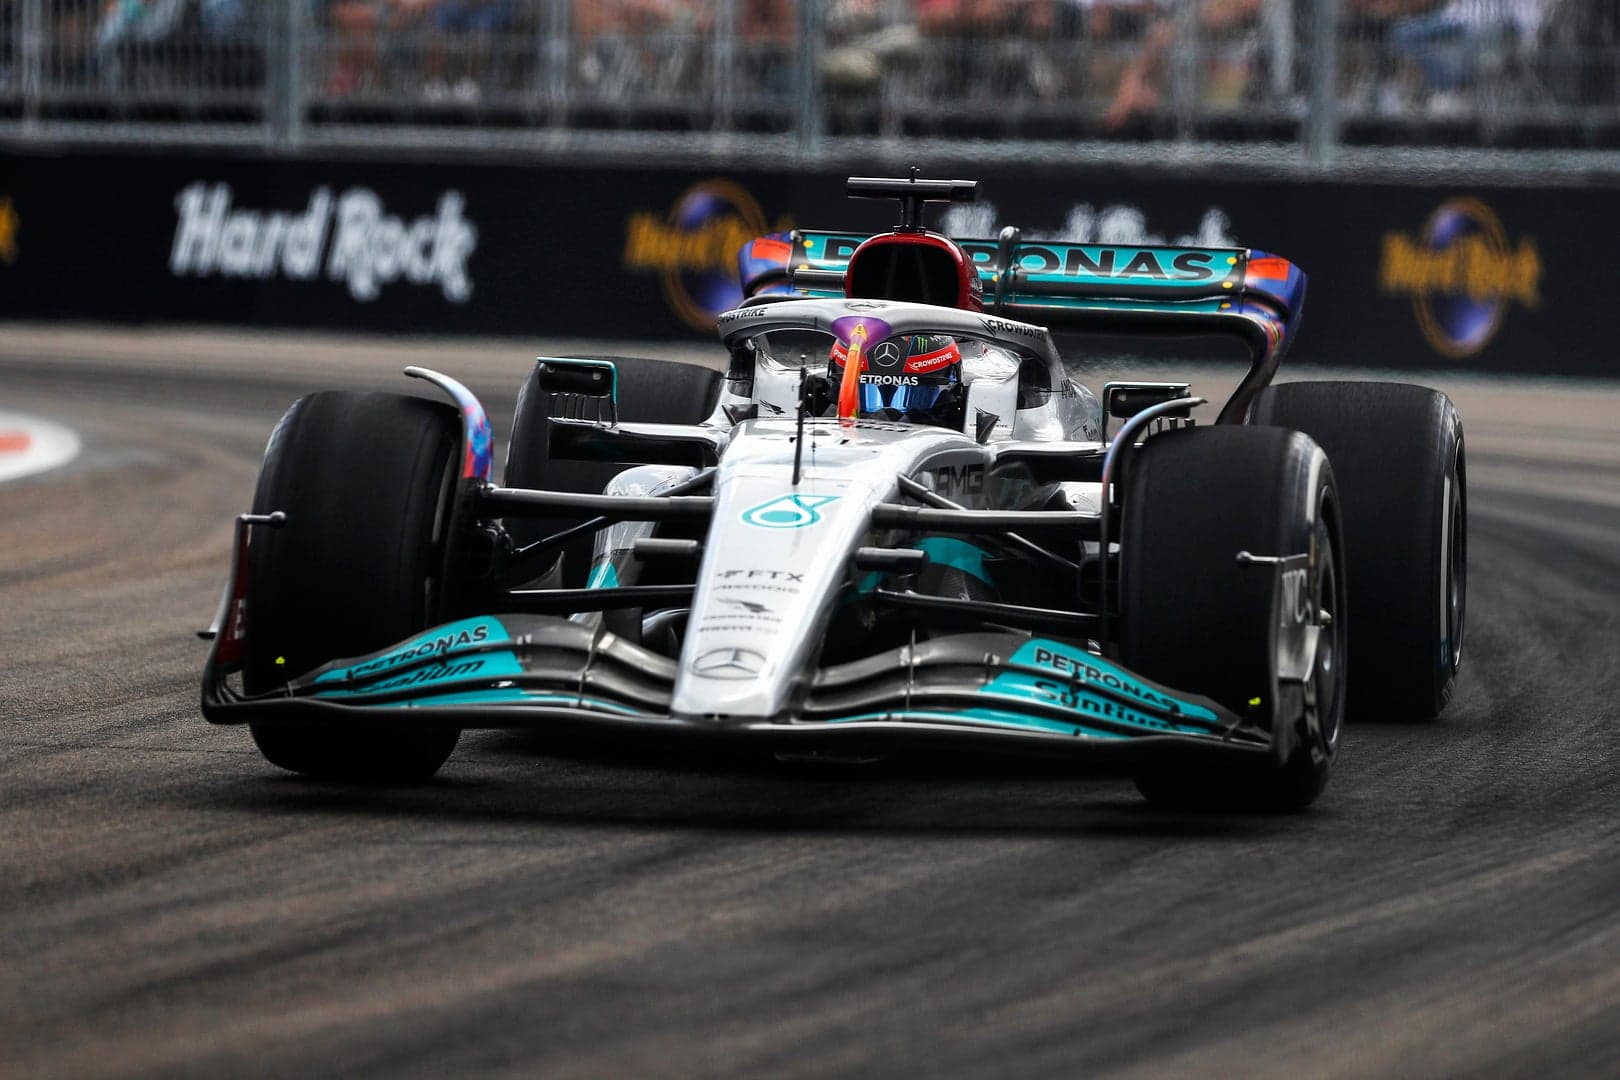 George Russell driving during the Miami Grand Prix